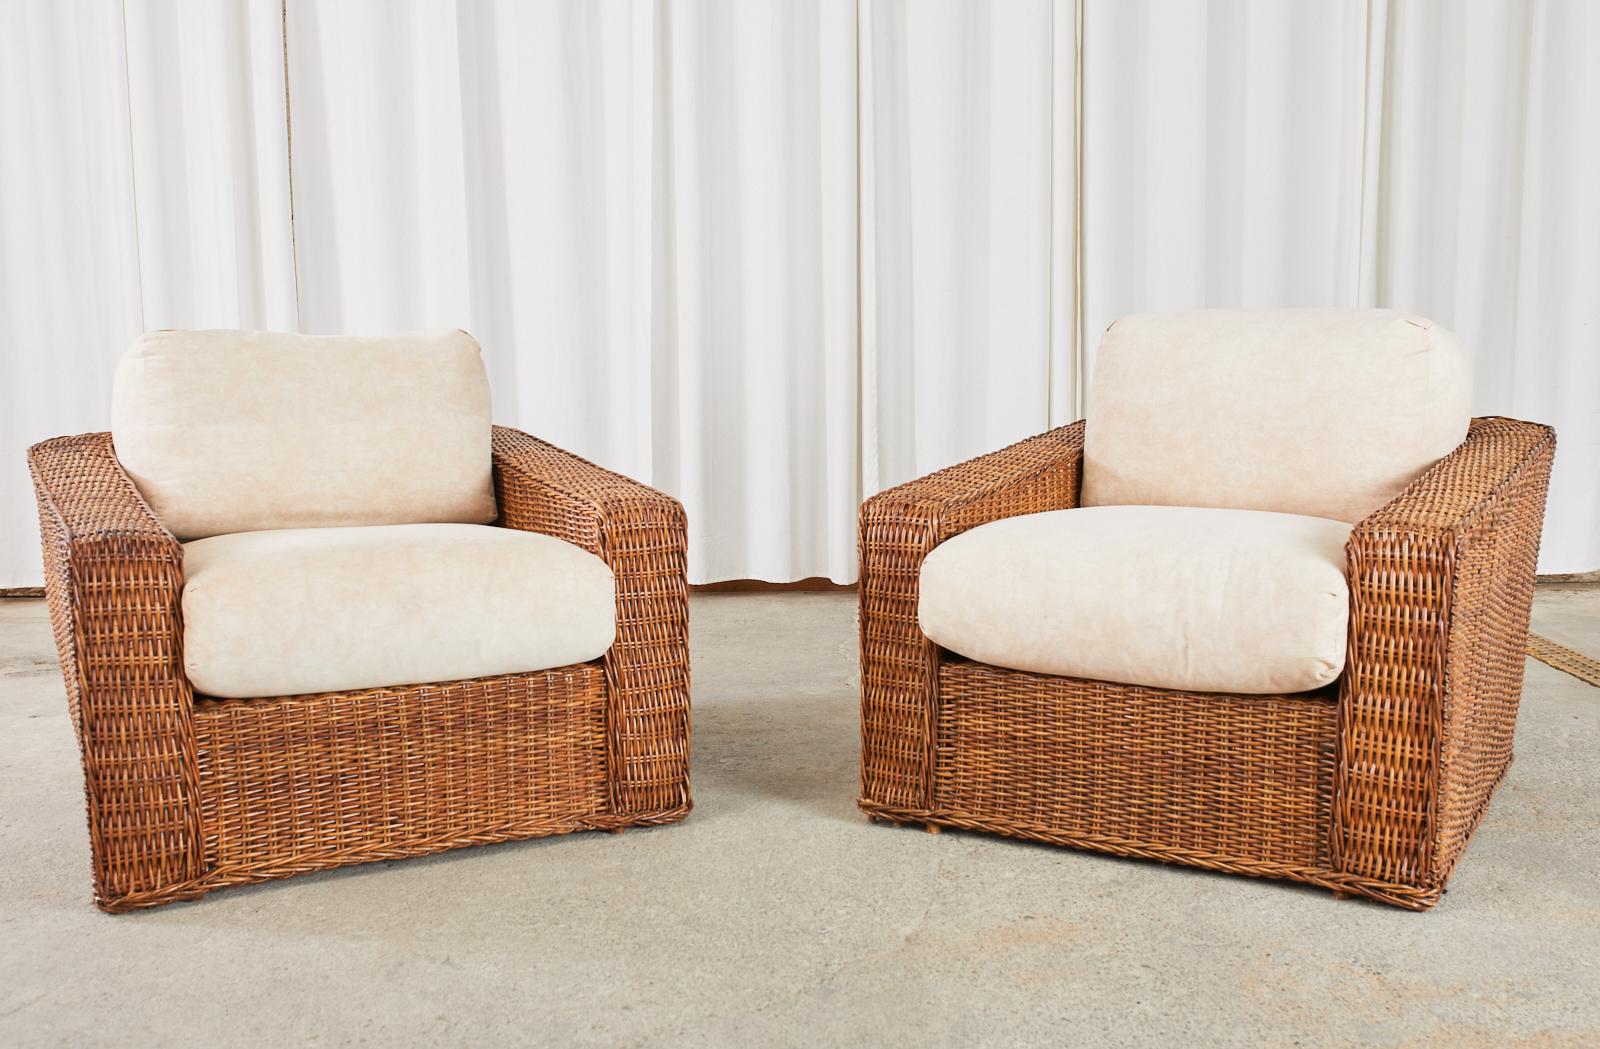 Grand pair of oversized woven rattan wicker cube shaped lounge chairs or club chairs made in the fabulous organic modern manner and style of Michael Taylor. The chairs feature a large bamboo and wood frame covered with woven rattan wicker with